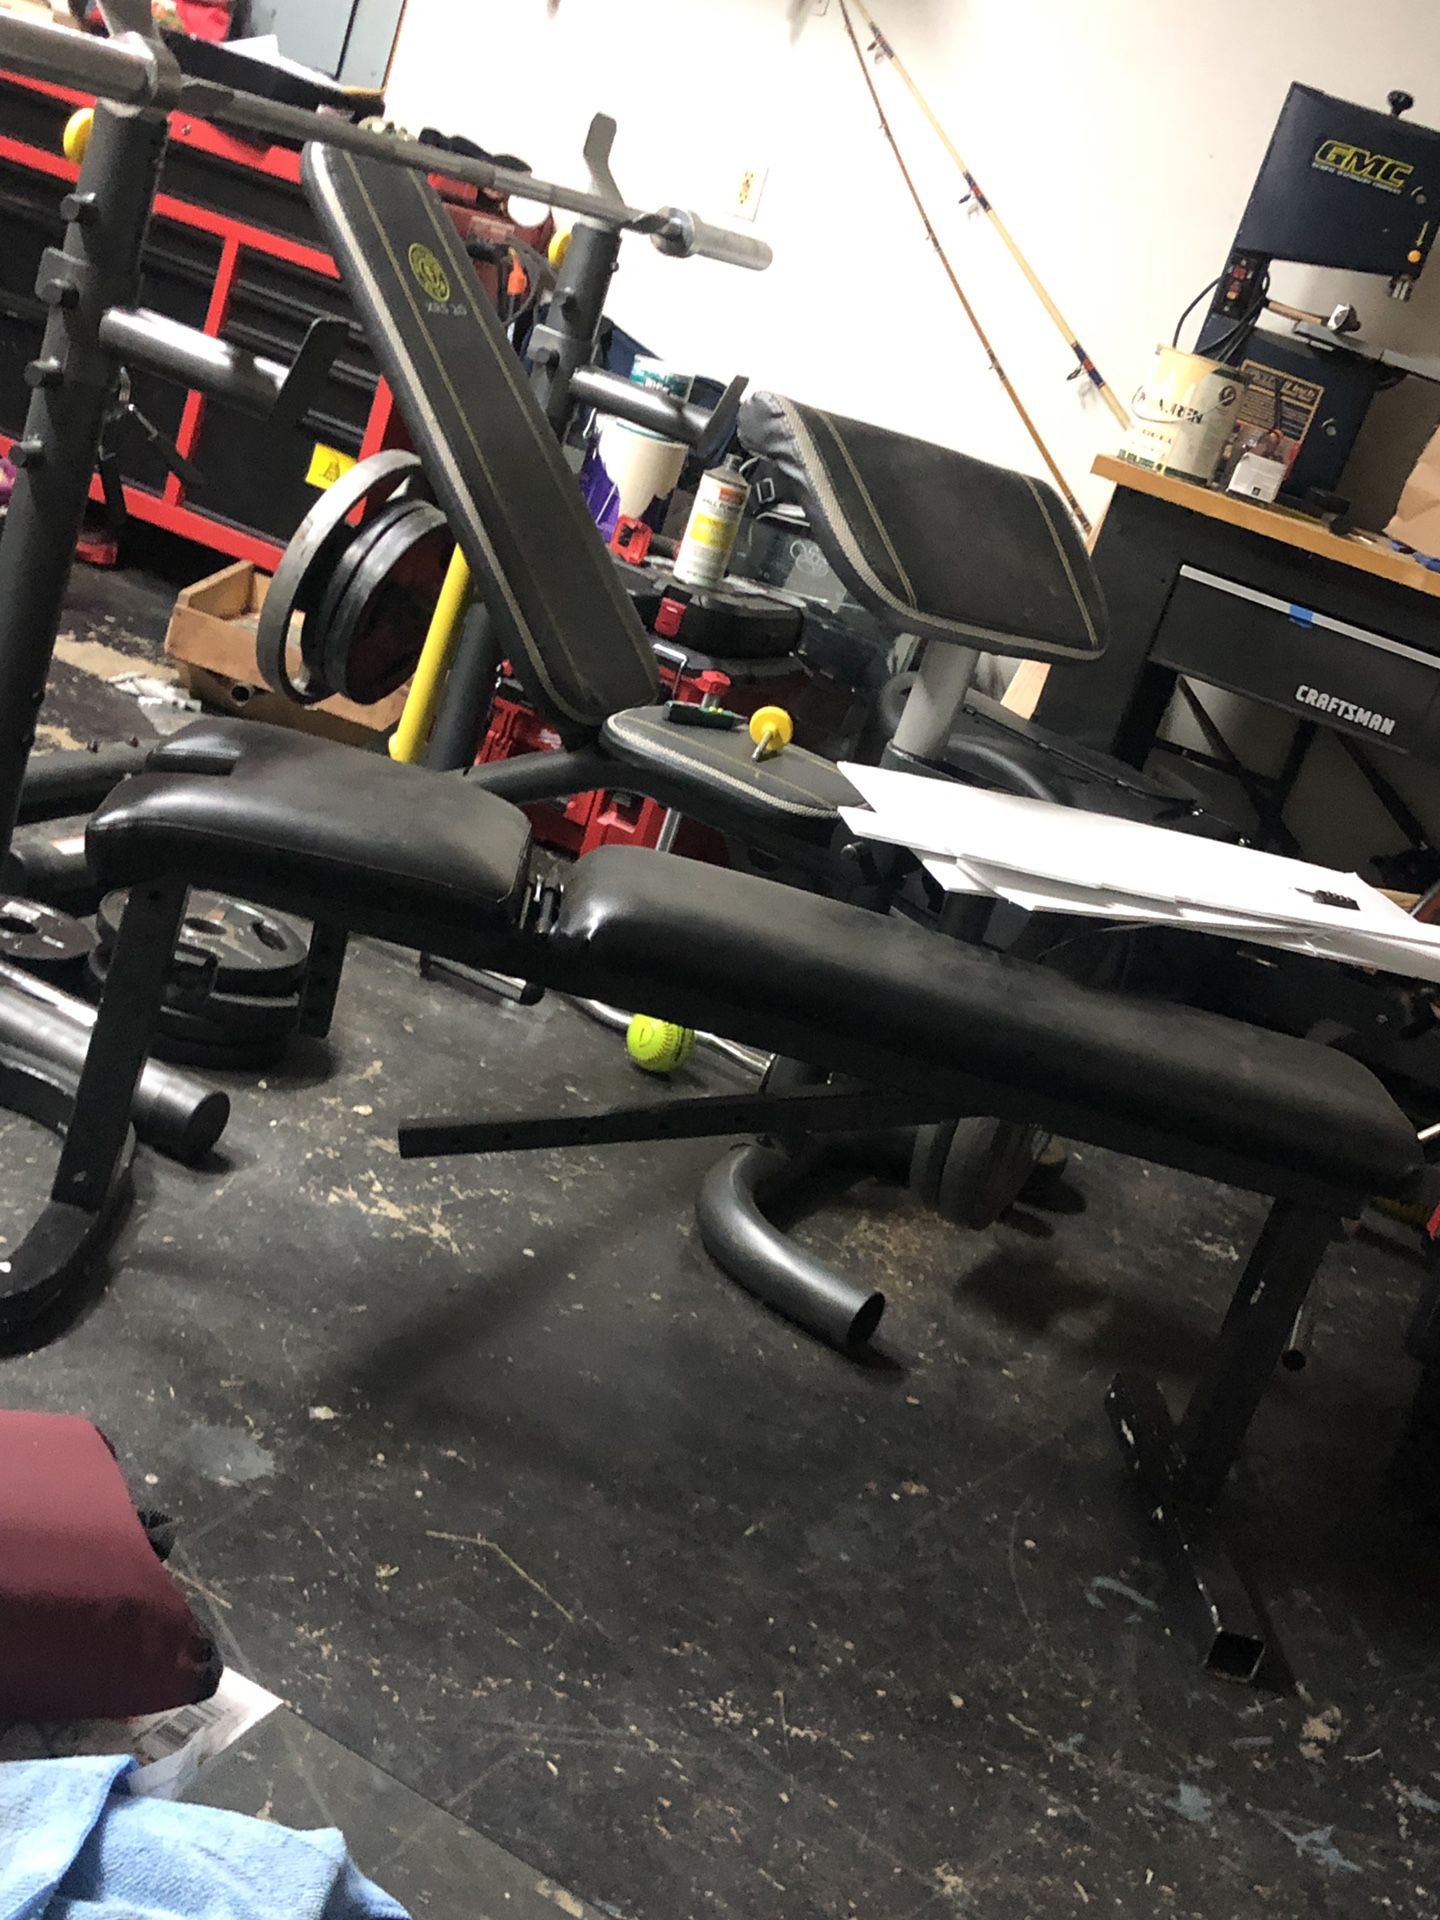 Olympic gym equipment for sale. 600lbs squat rack benches bars pull up bar